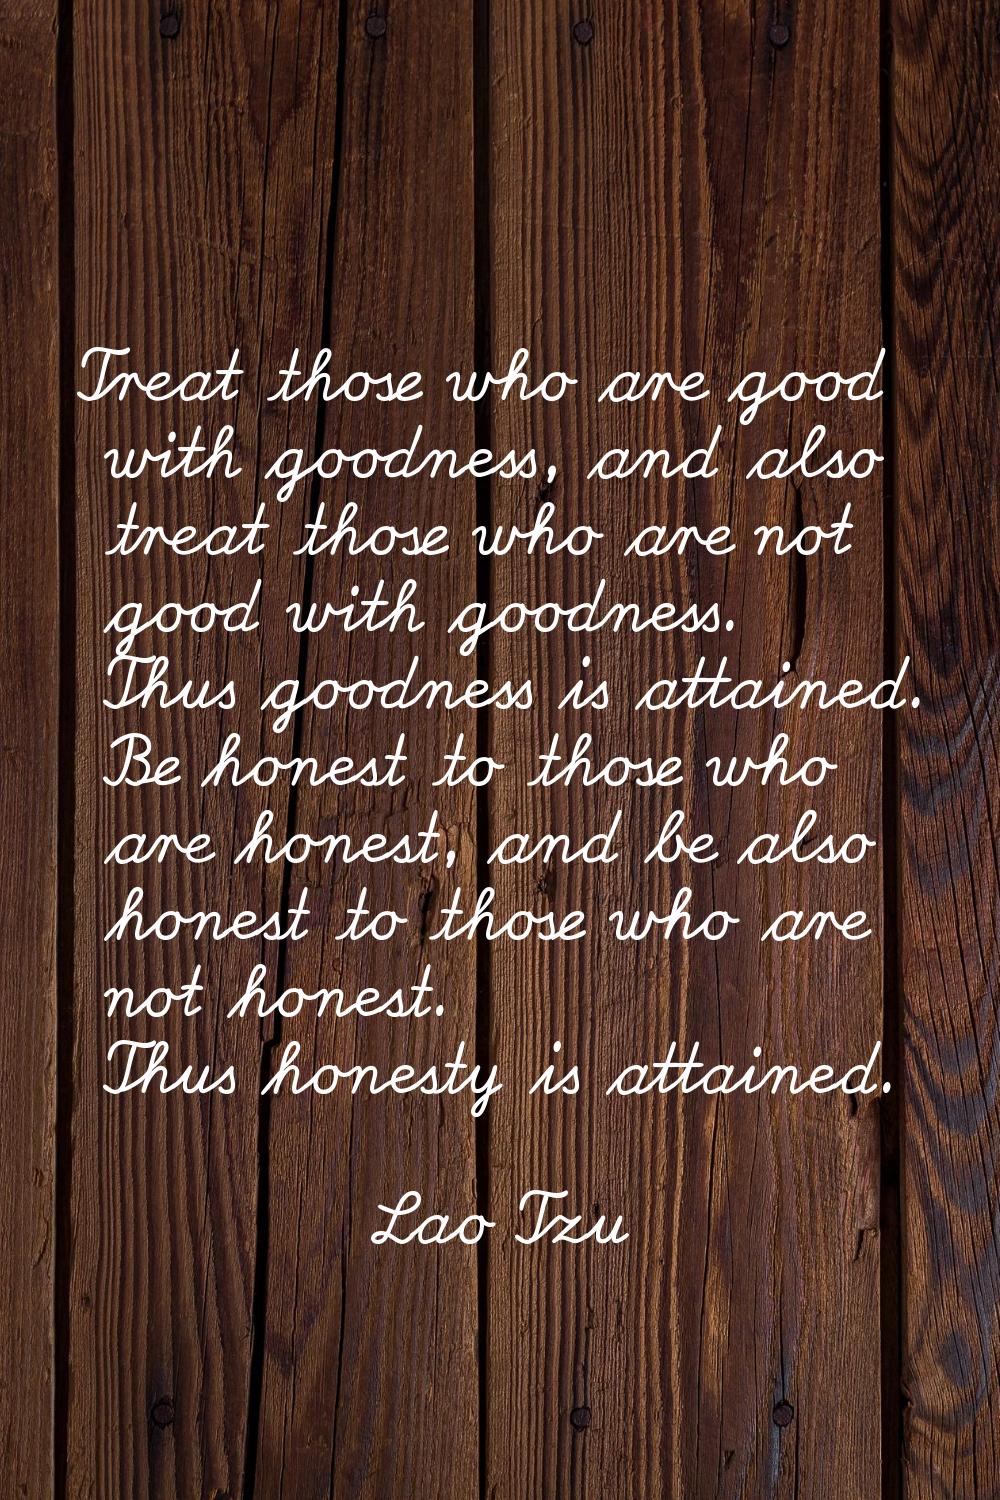 Treat those who are good with goodness, and also treat those who are not good with goodness. Thus g